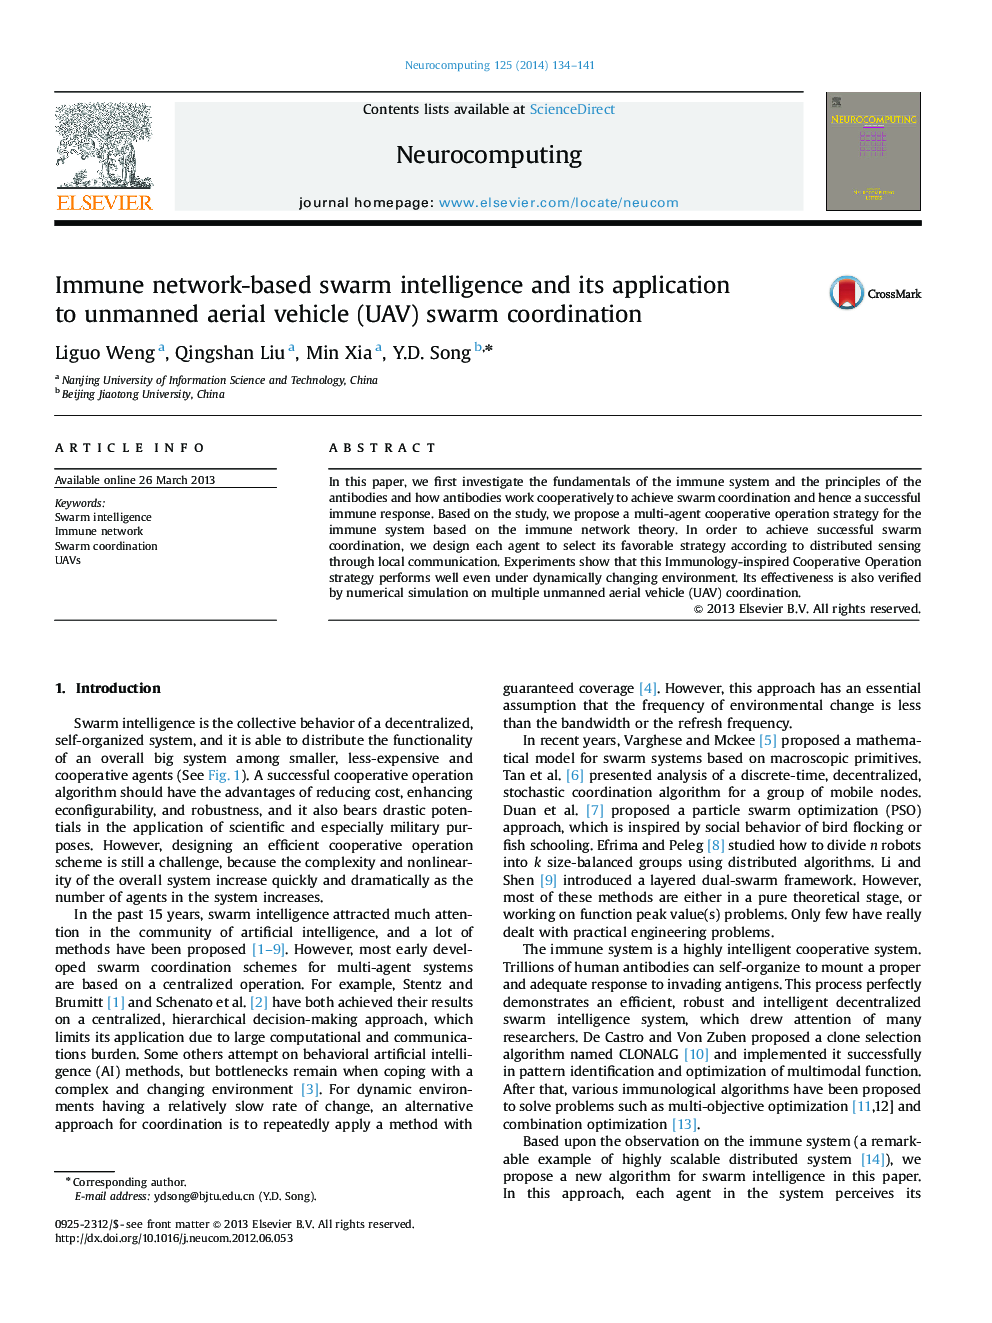 Immune network-based swarm intelligence and its application to unmanned aerial vehicle (UAV) swarm coordination